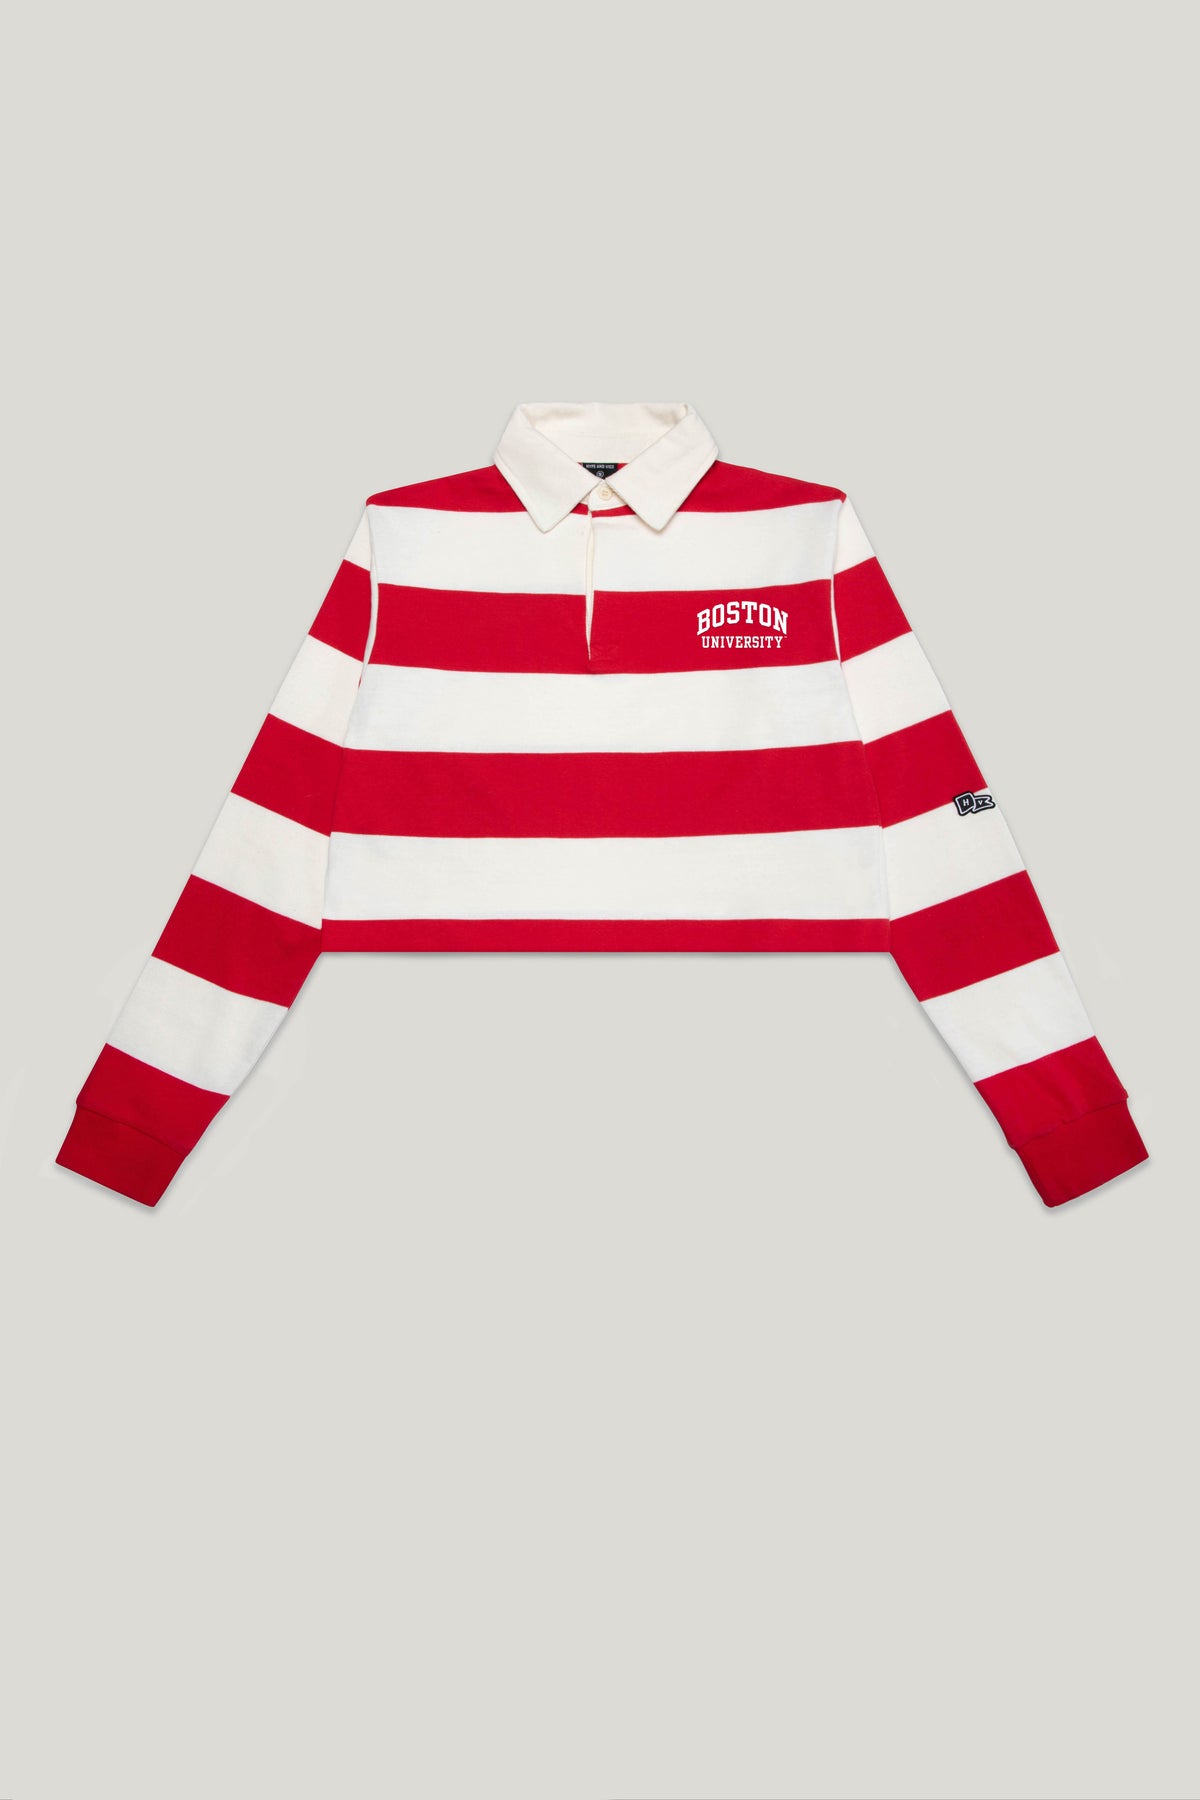 Boston University Rugby Top